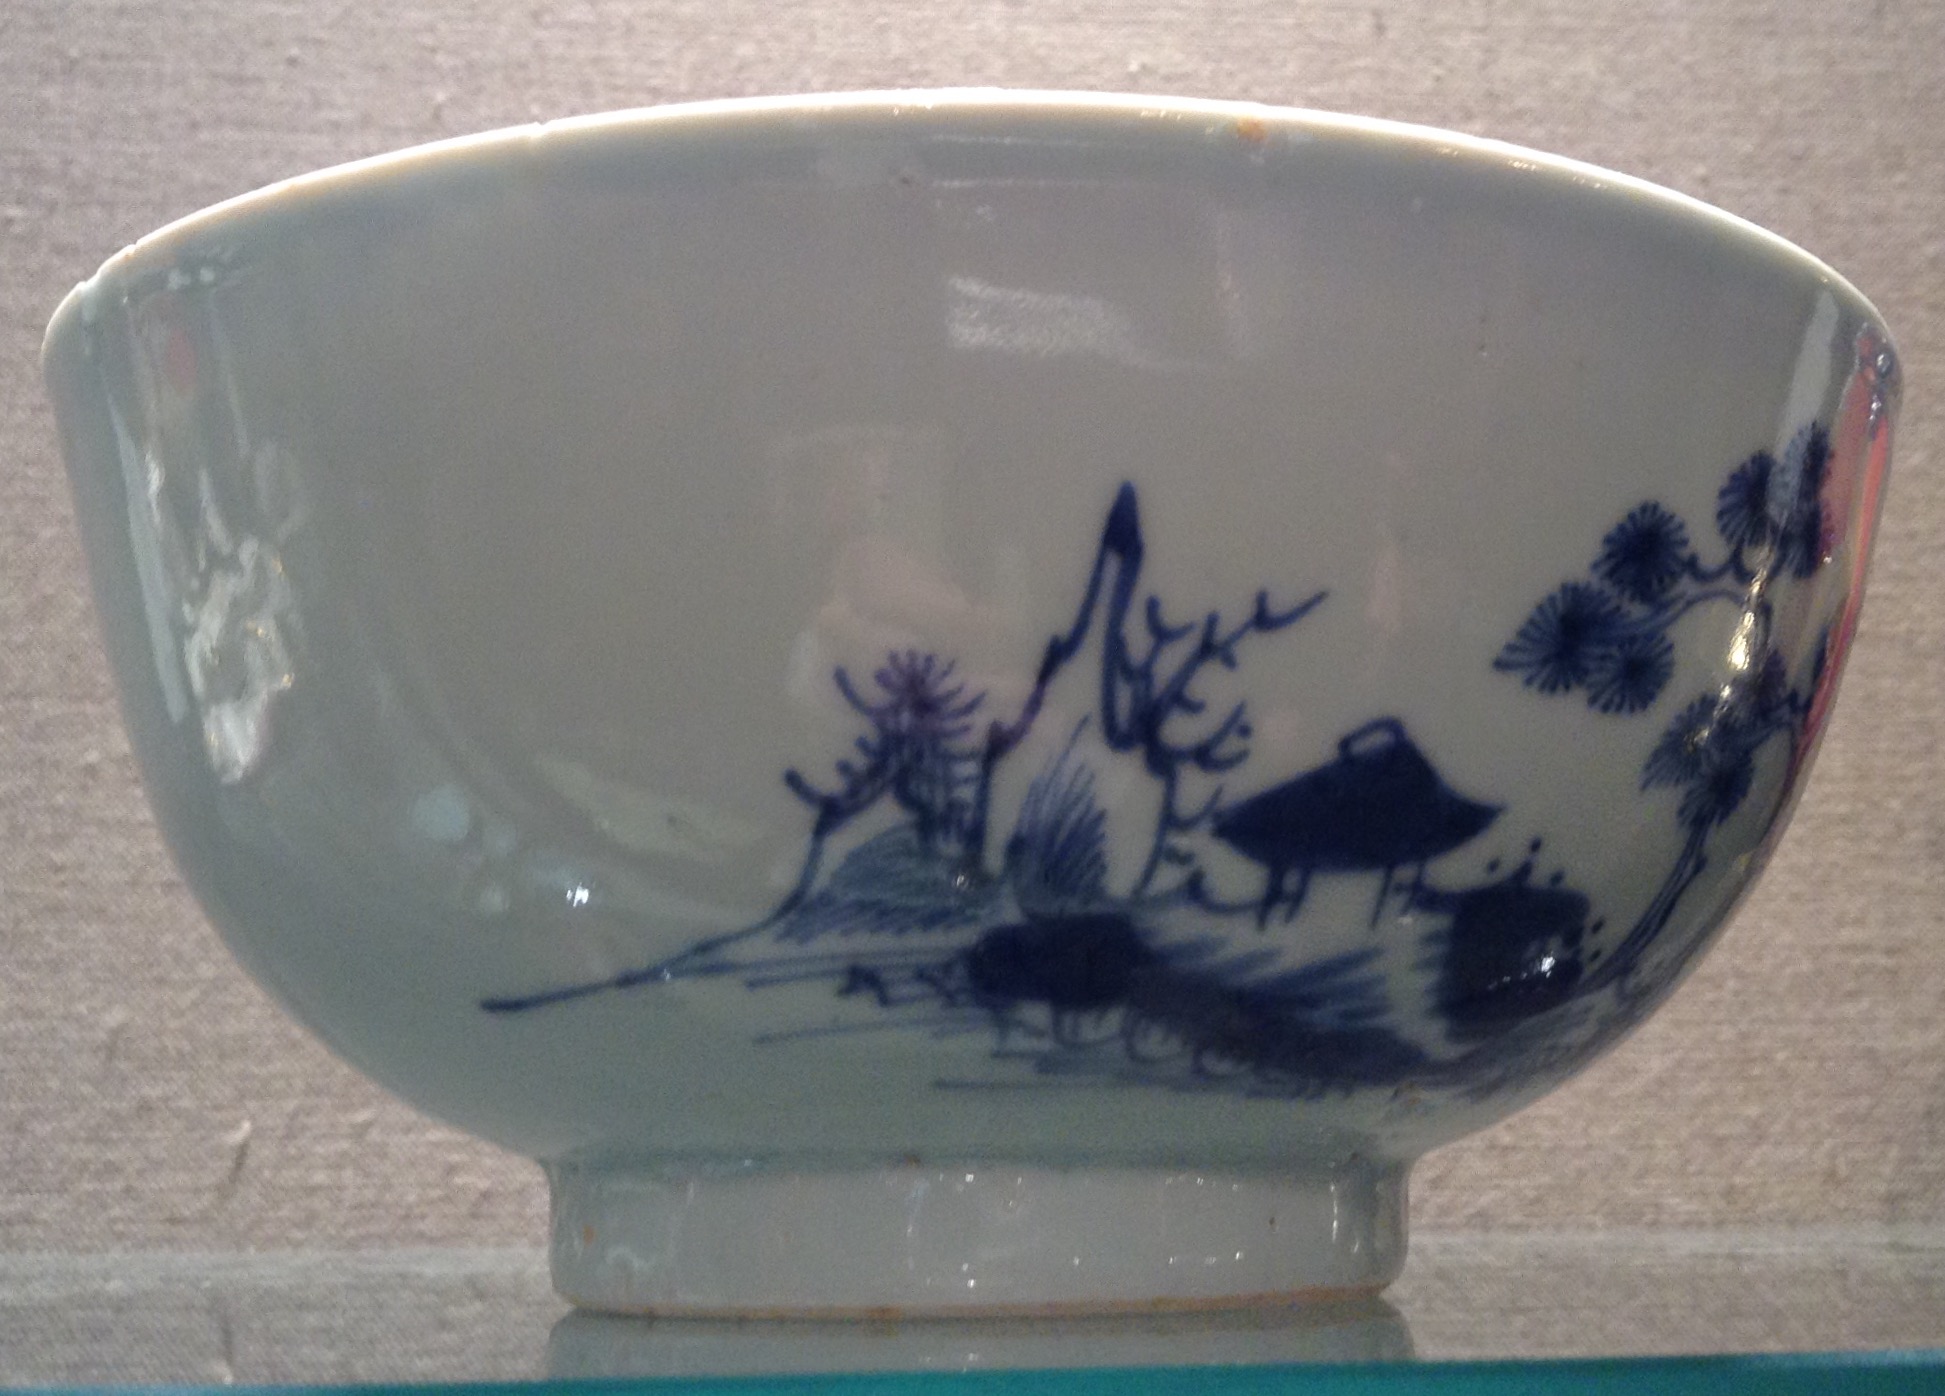 NANKING CARGO, AN 18TH CENTURY CHINESE PORCELAIN BOWL Hand painted in underglaze blue and - Image 3 of 5